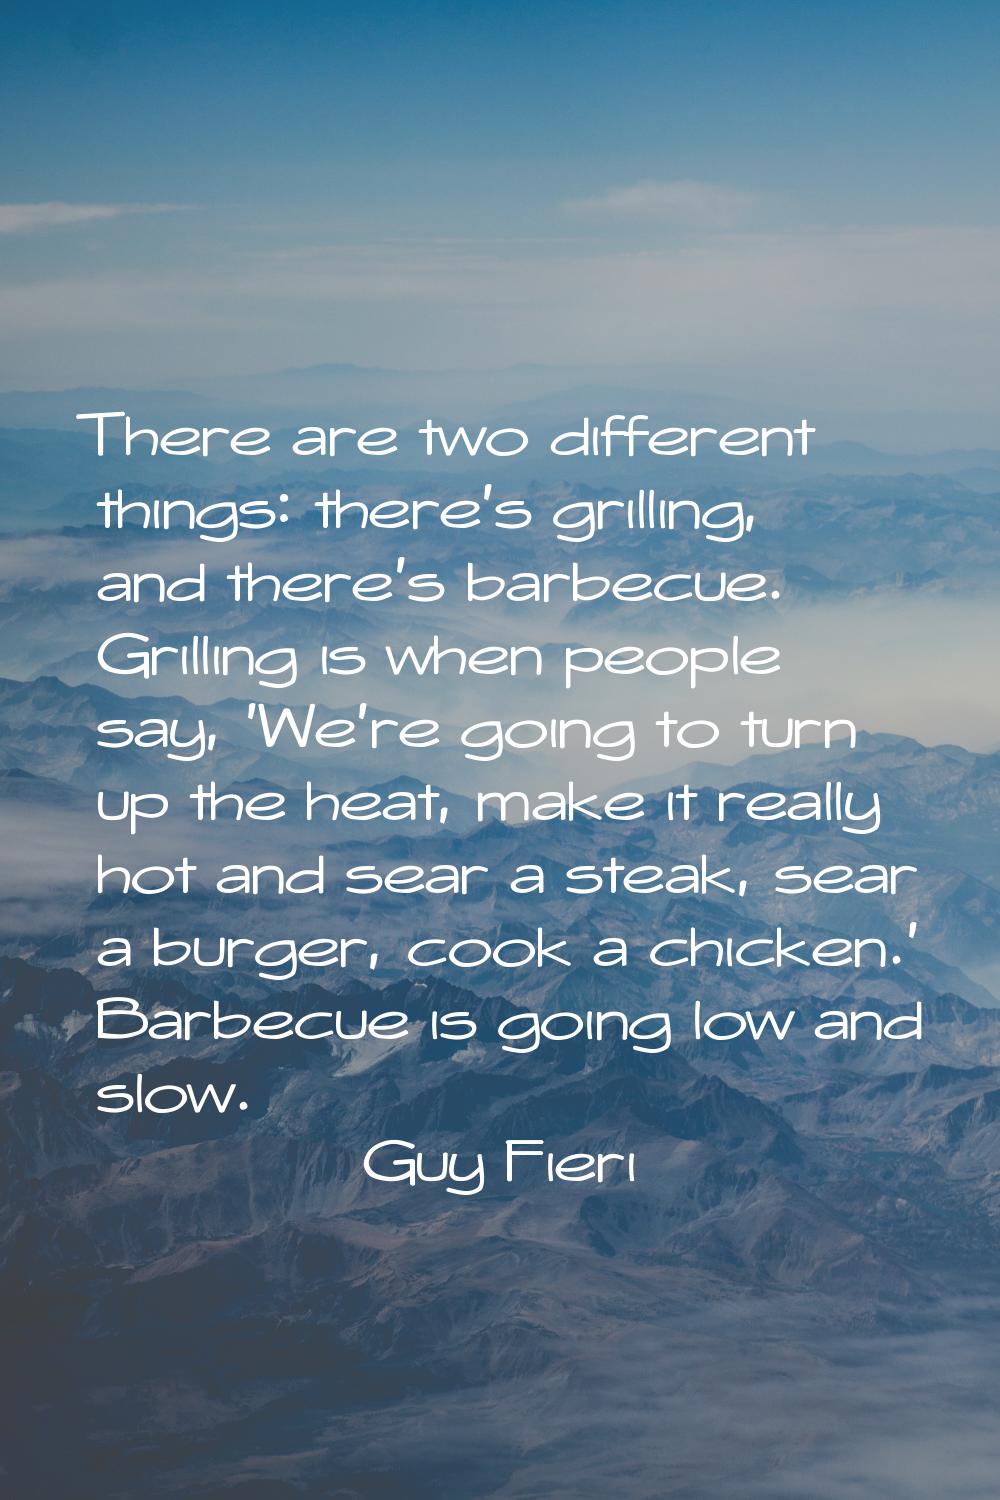 There are two different things: there's grilling, and there's barbecue. Grilling is when people say